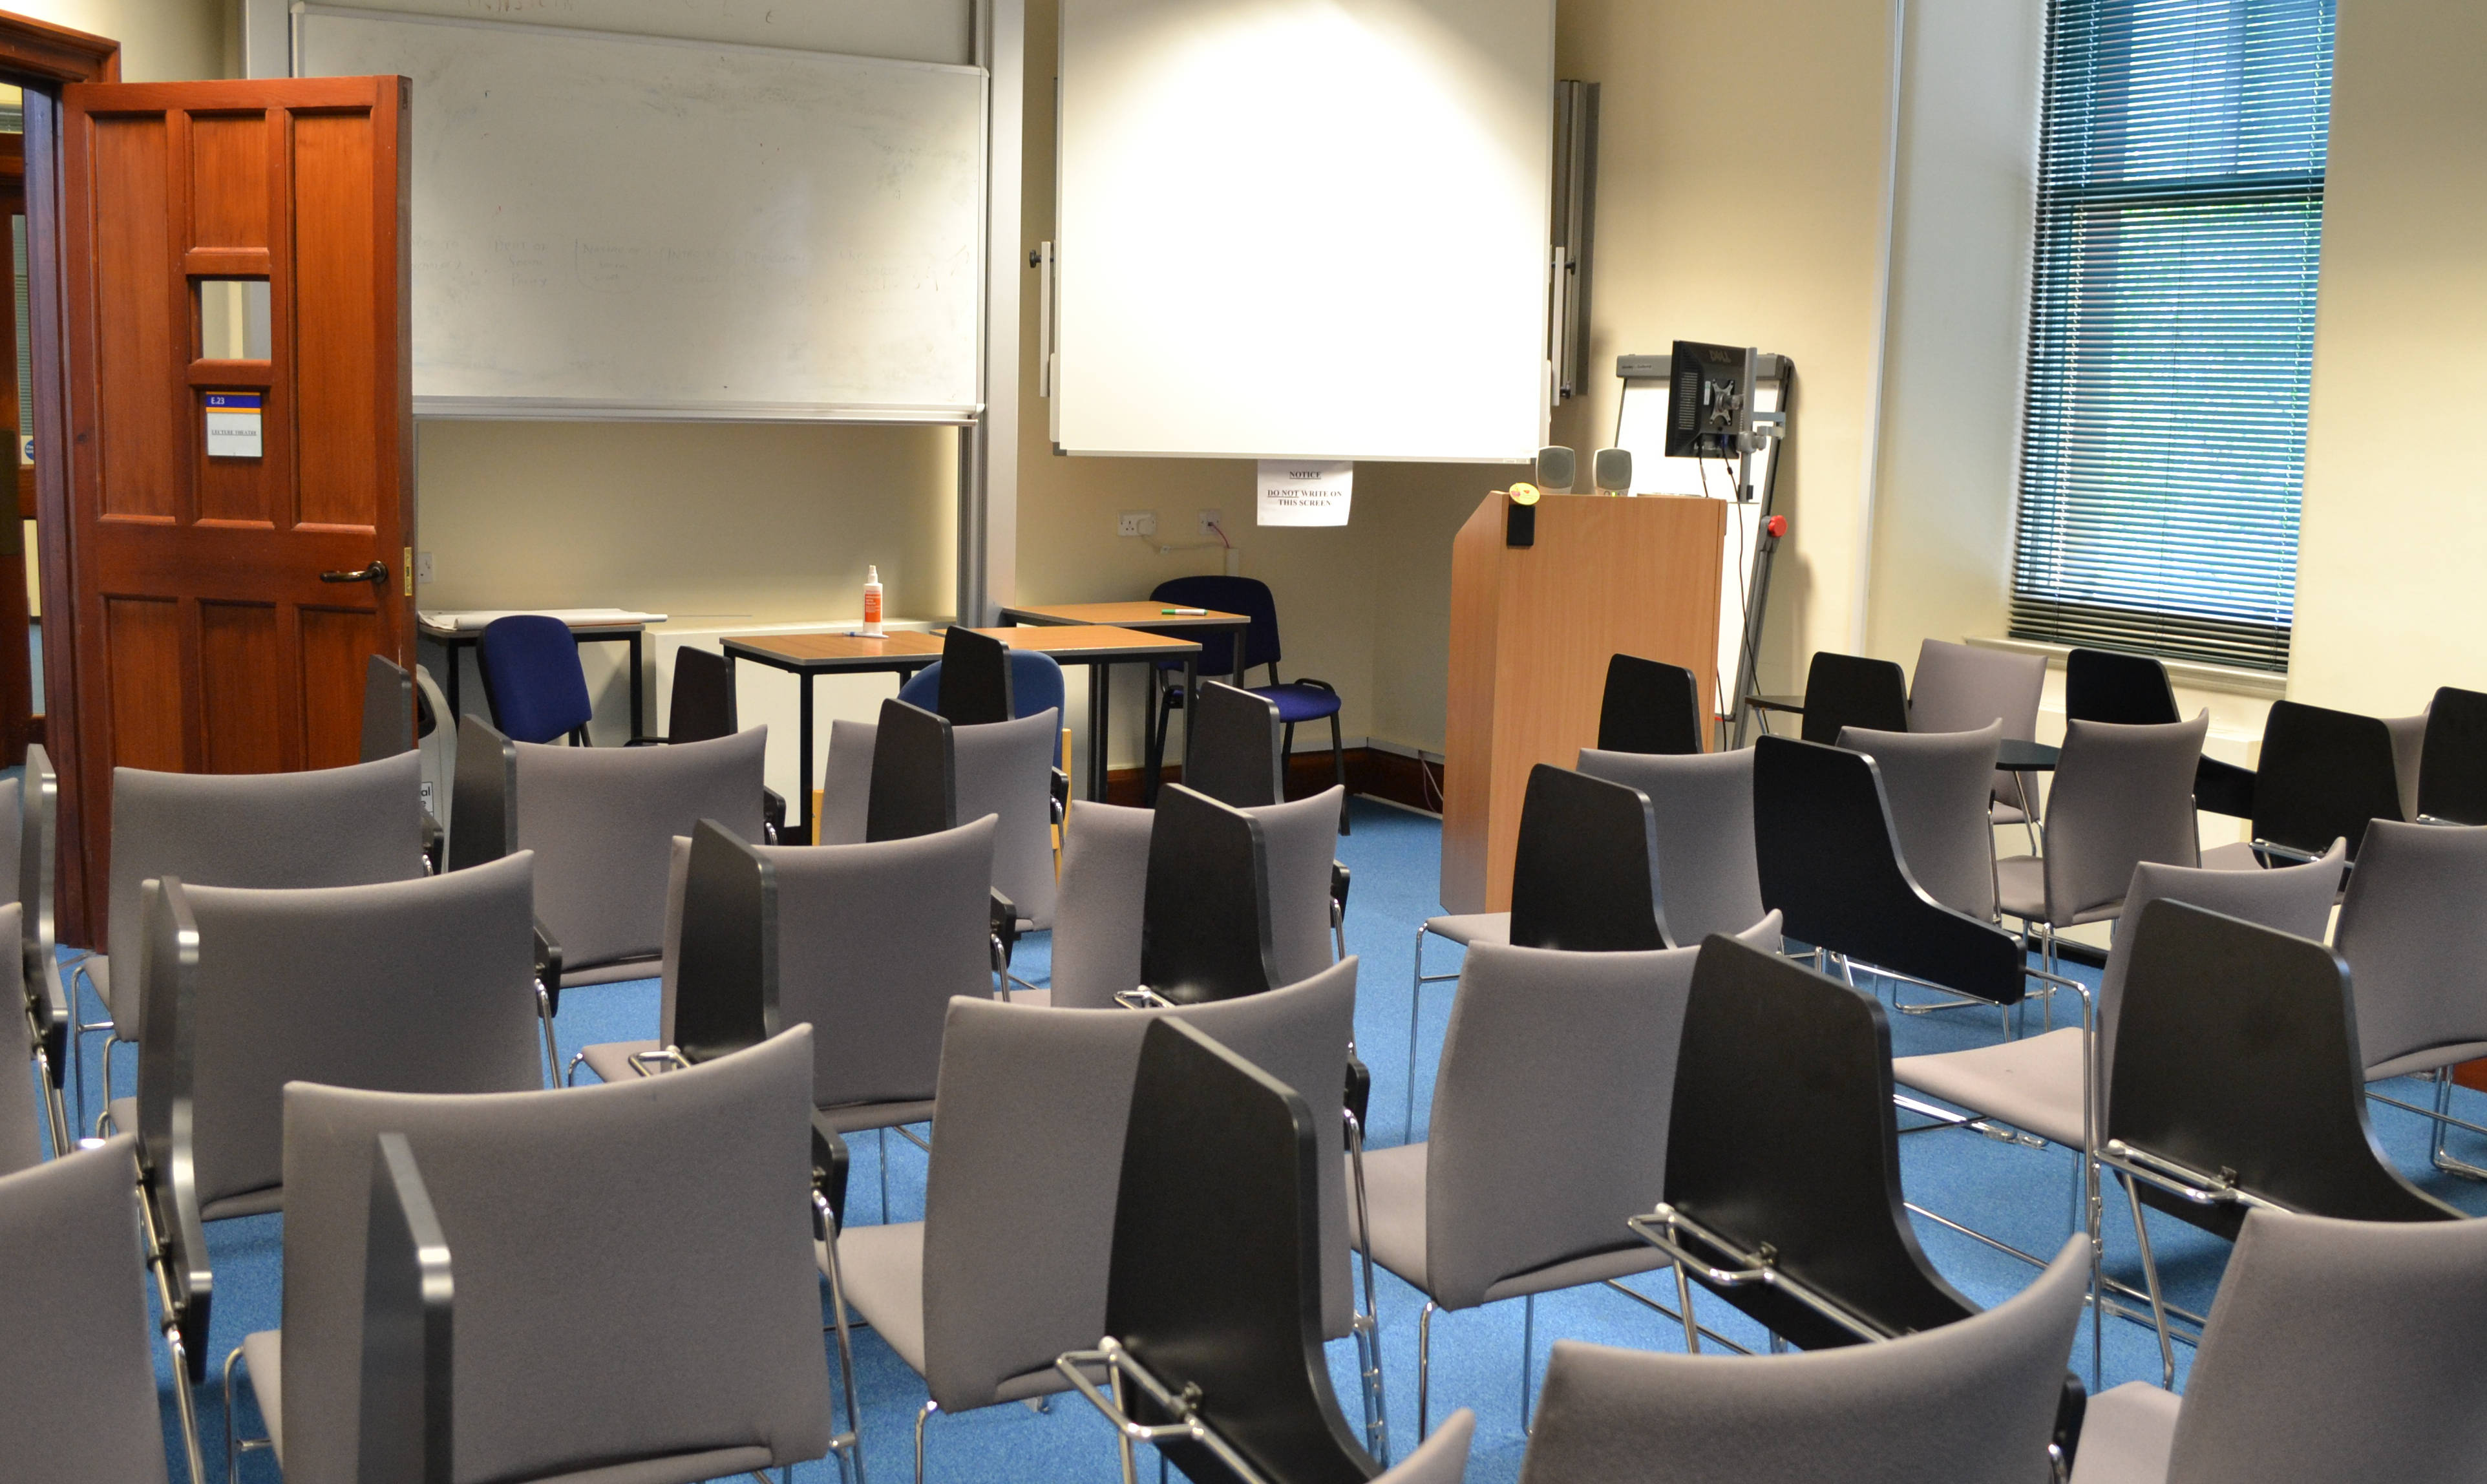 Class Room Facilities at Dumfries Campus UWS | University of the West of Scotland